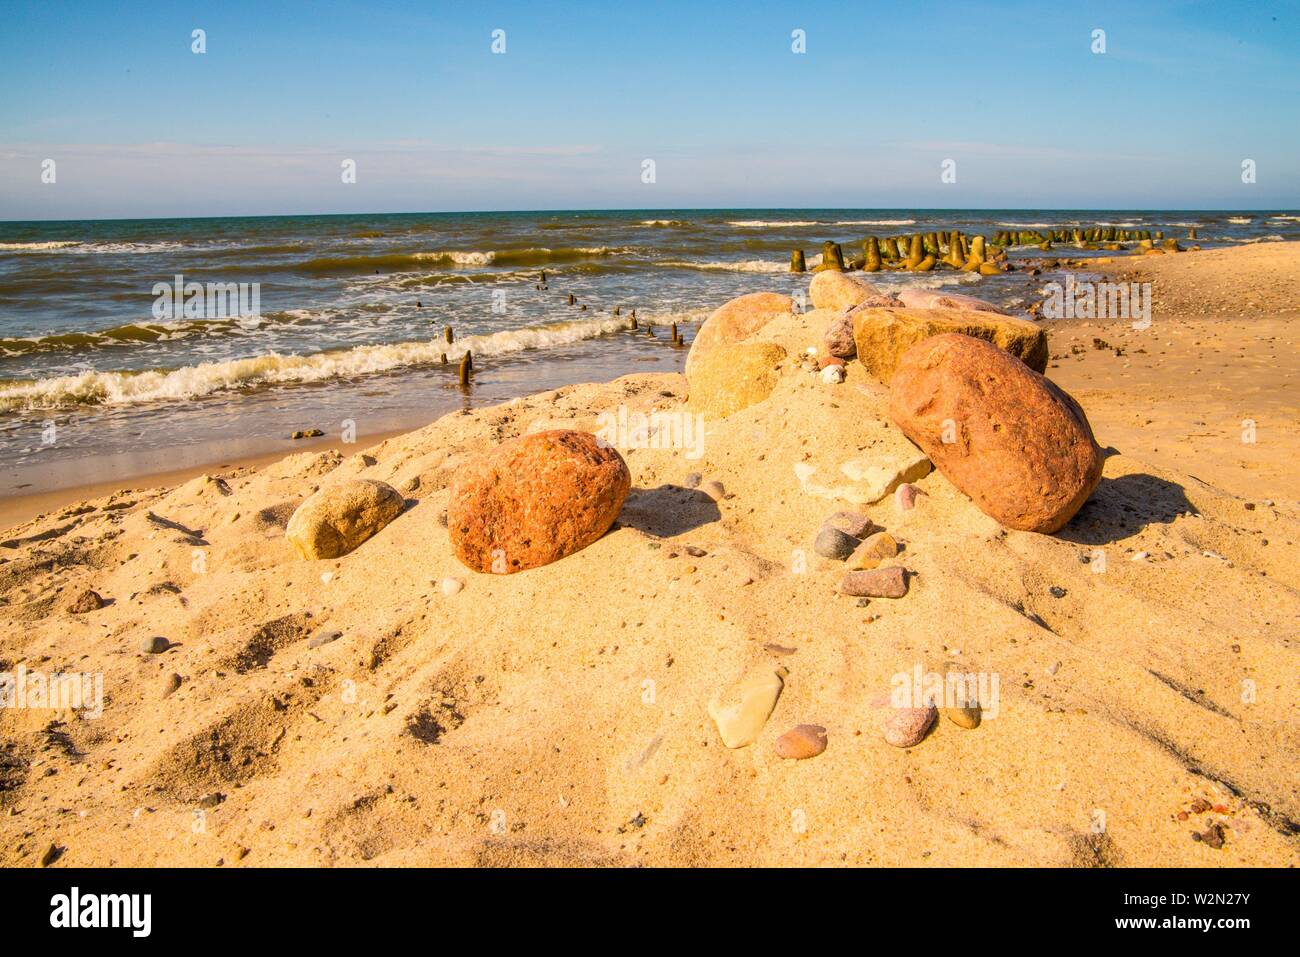 lonesome, unaffected beach of the Baltic Sea in Poland. Stock Photo